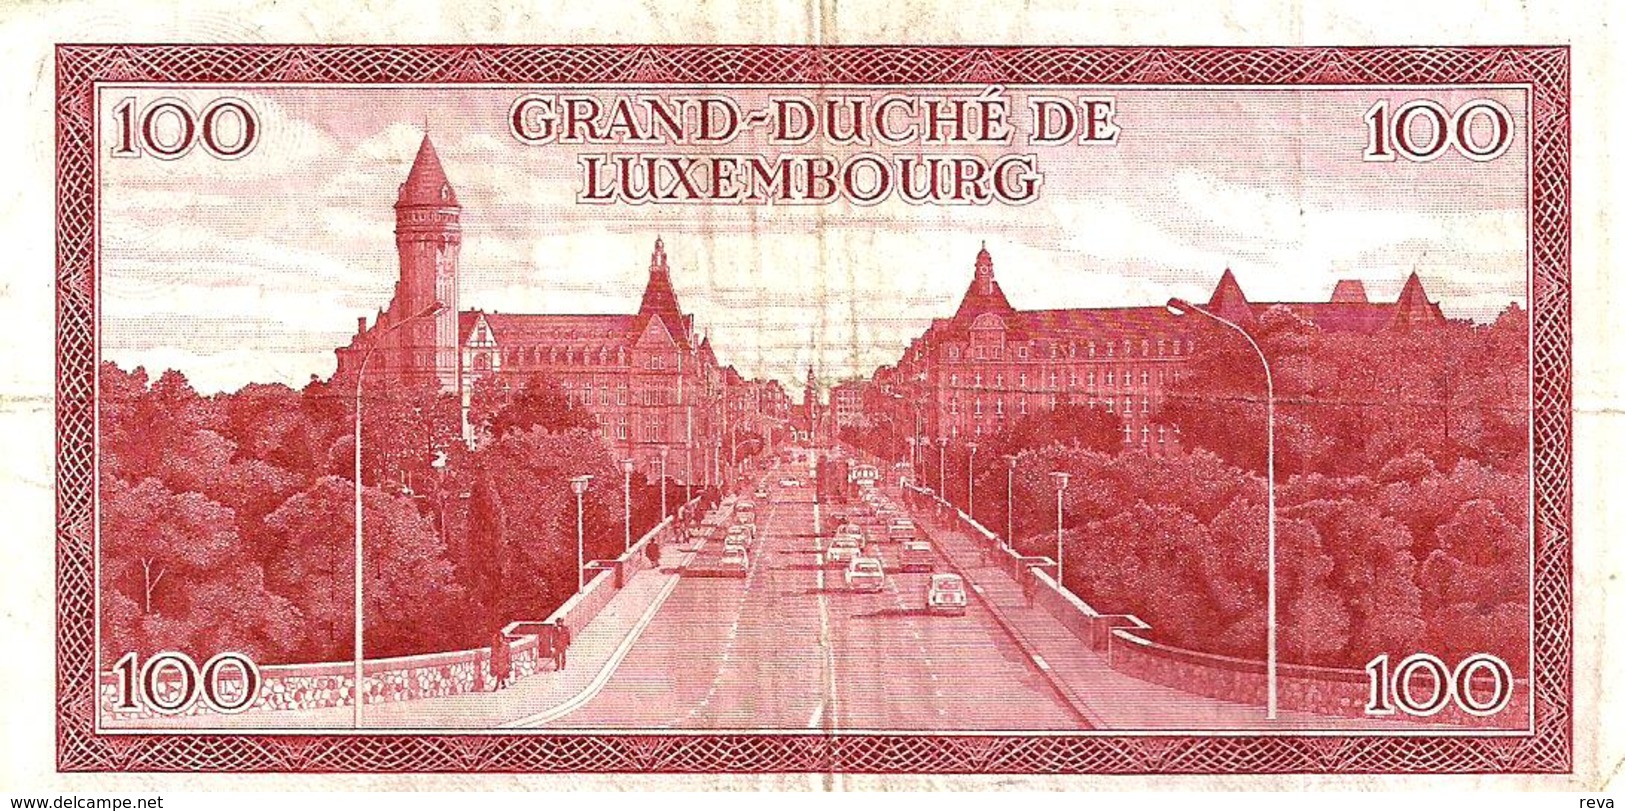 LUXEMBOURG 100 FRANCS RED MAN HEAD FRONT & CASTLE BACK DATED 15-07-1970 AVF P56 READ DESCRIPTION!! - Luxemburg